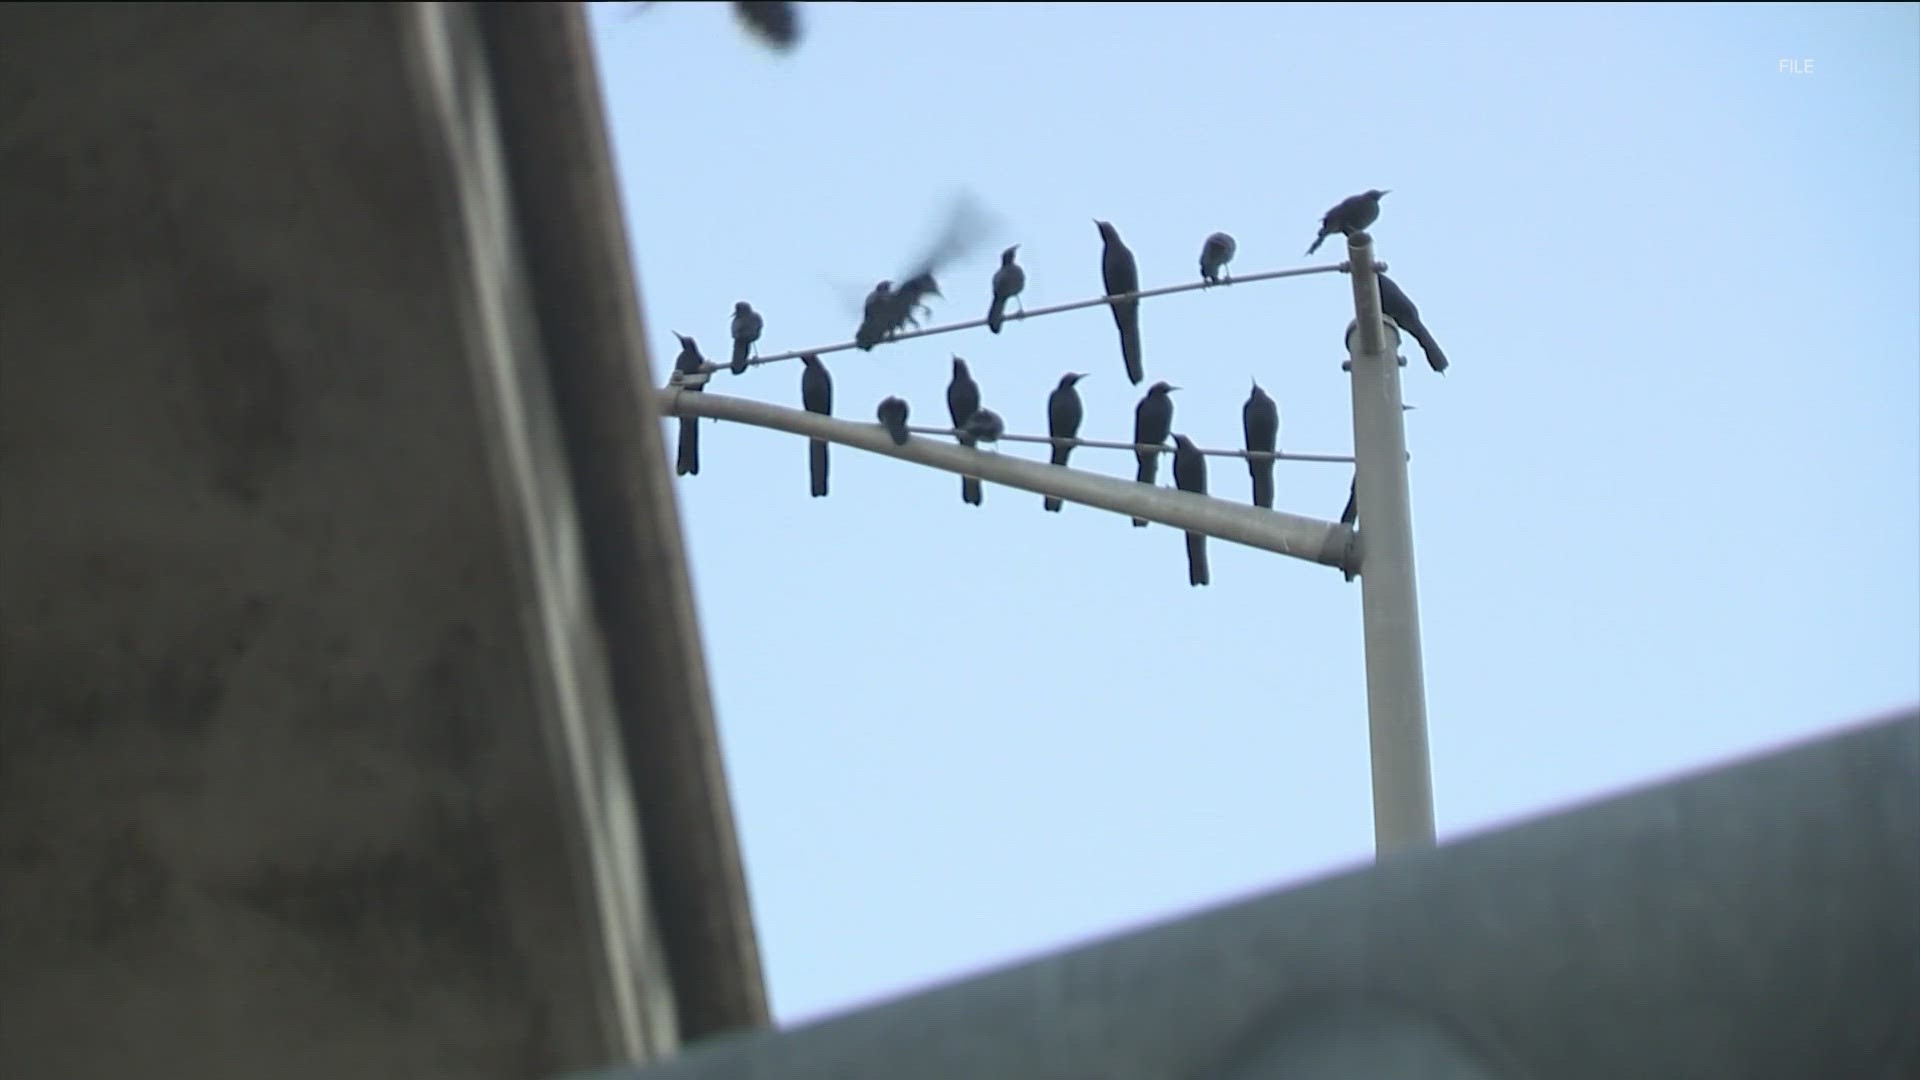 Environmental activists are urging everyone to help birds safely migrate by turning off all non-essential lights from 11 p.m. to 6 a.m. every day.